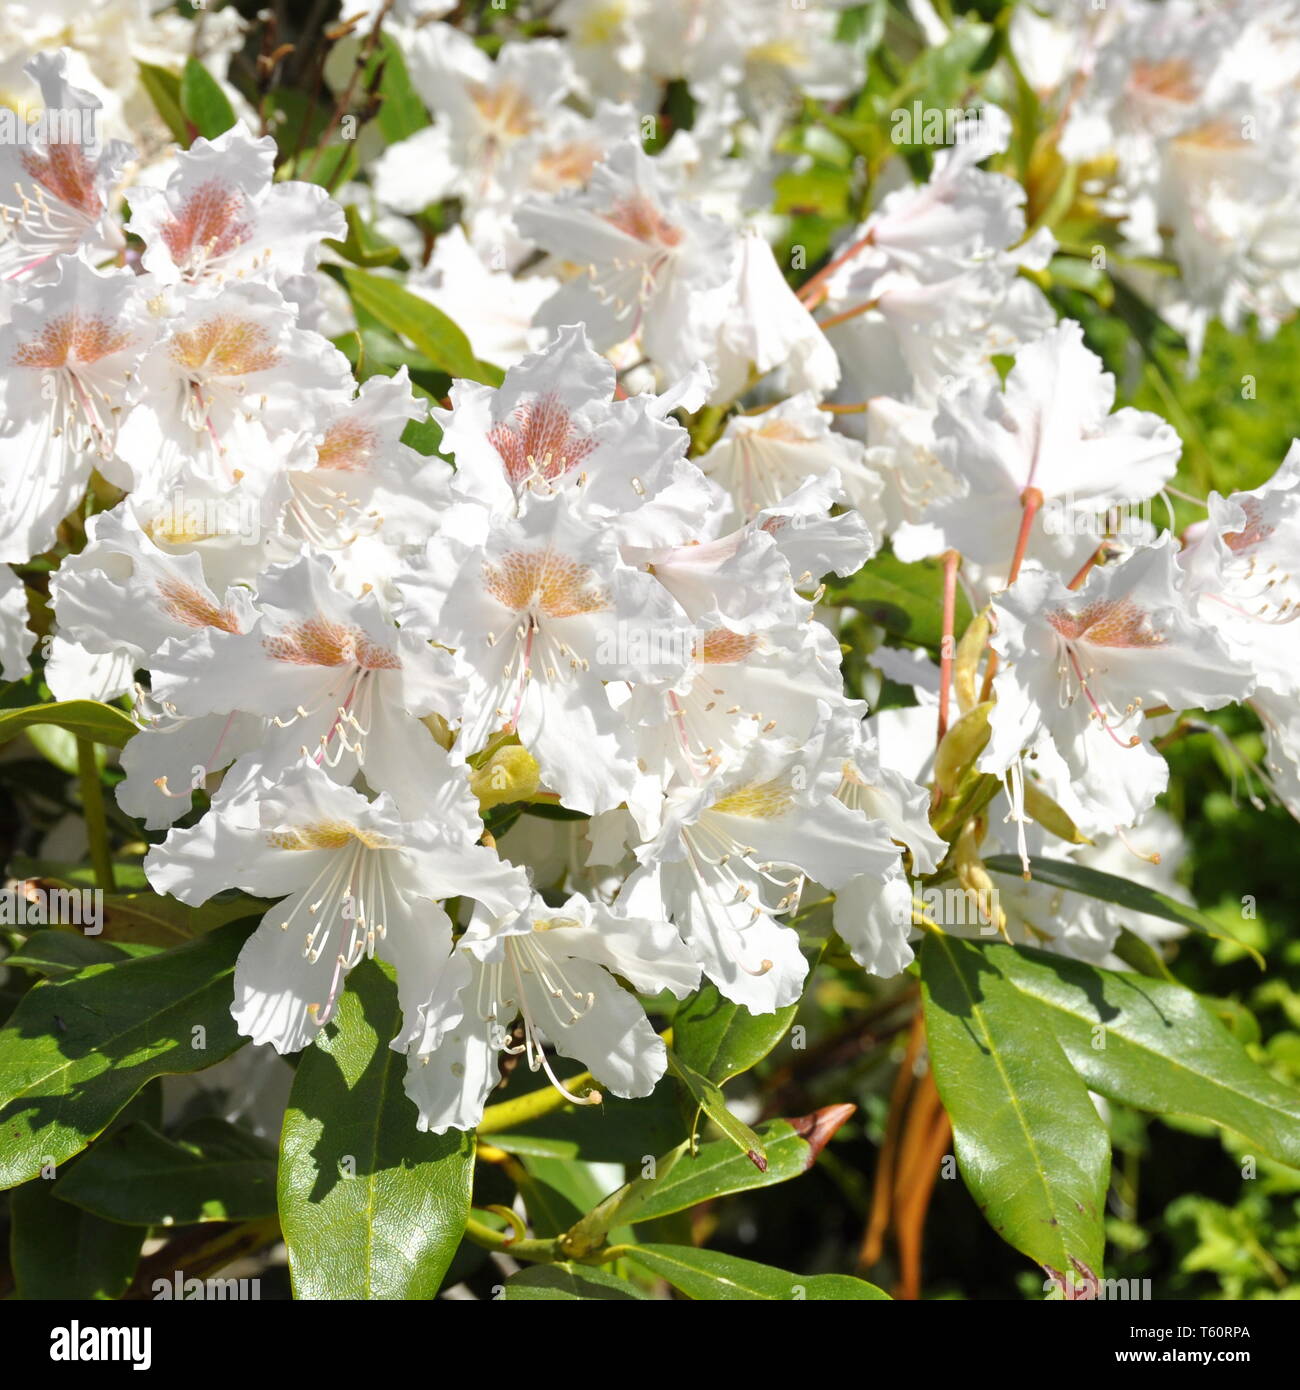 Closeup on white Rhododendron flowers Stock Photo